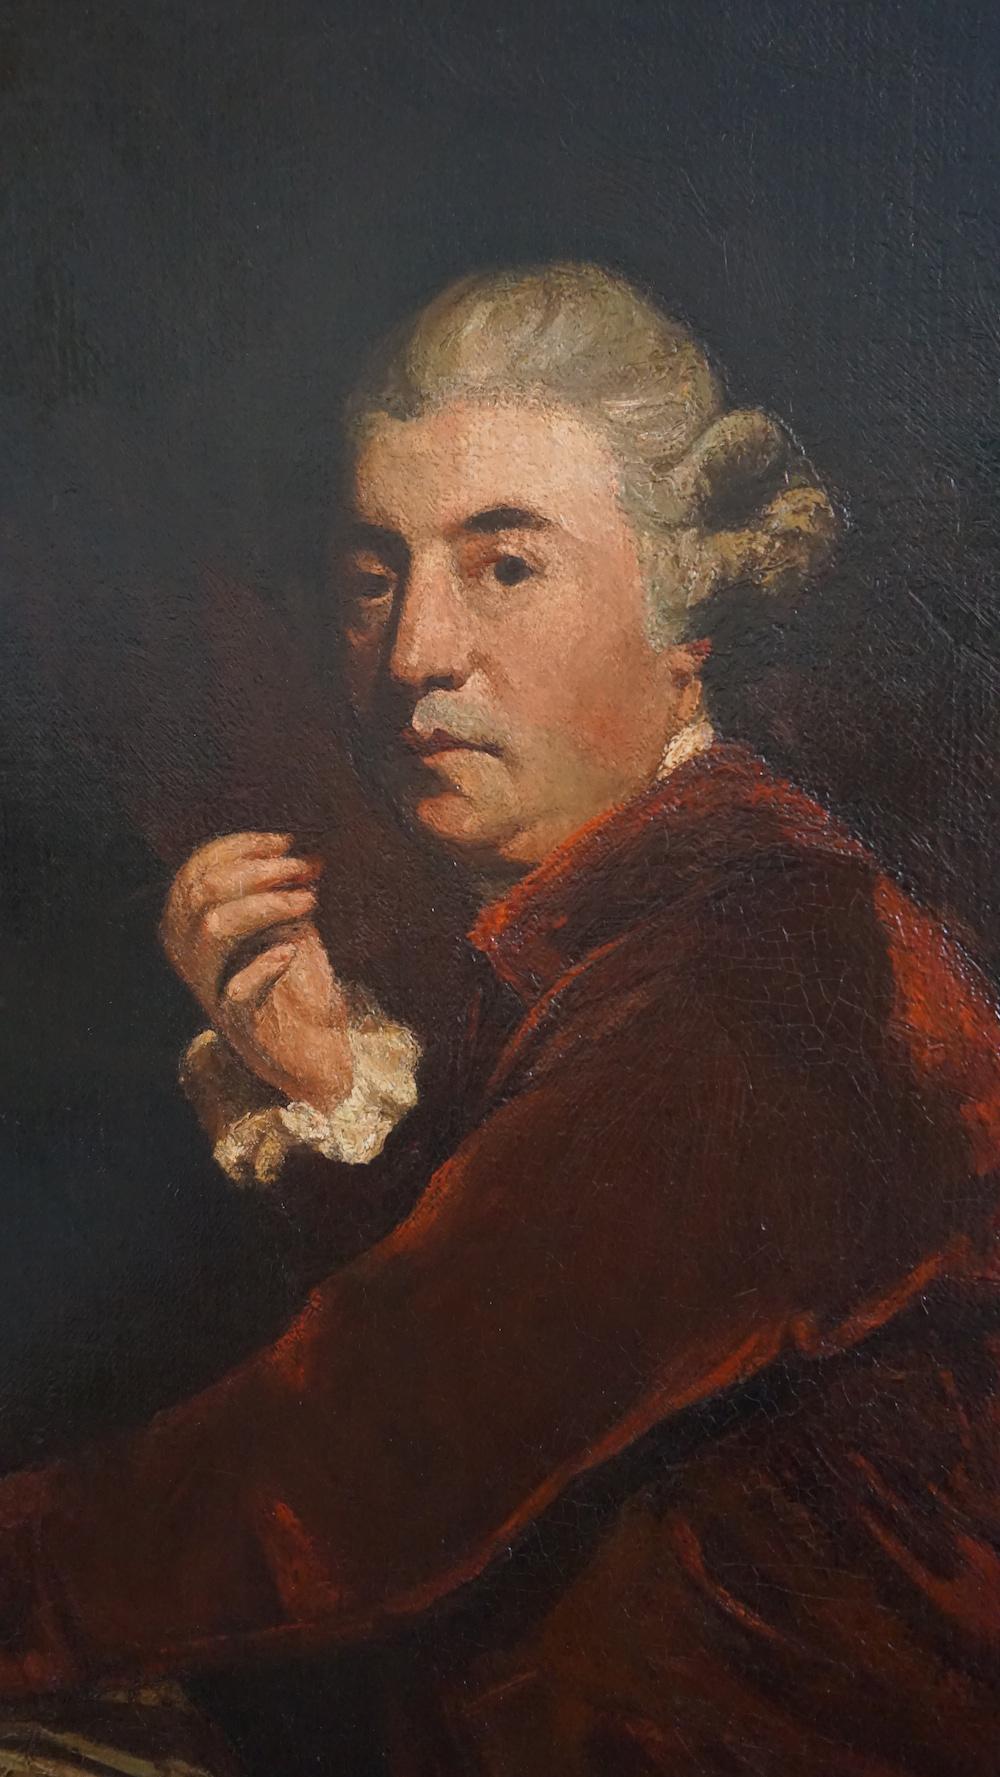 Oil on herringbone canvas copy of Joshua Reynolds’s portrait of the architect Sir William Chambers painted in 1779; the original of which is in the Royal Academy of Arts, London. This is one of few known copies painted after the architect's death,